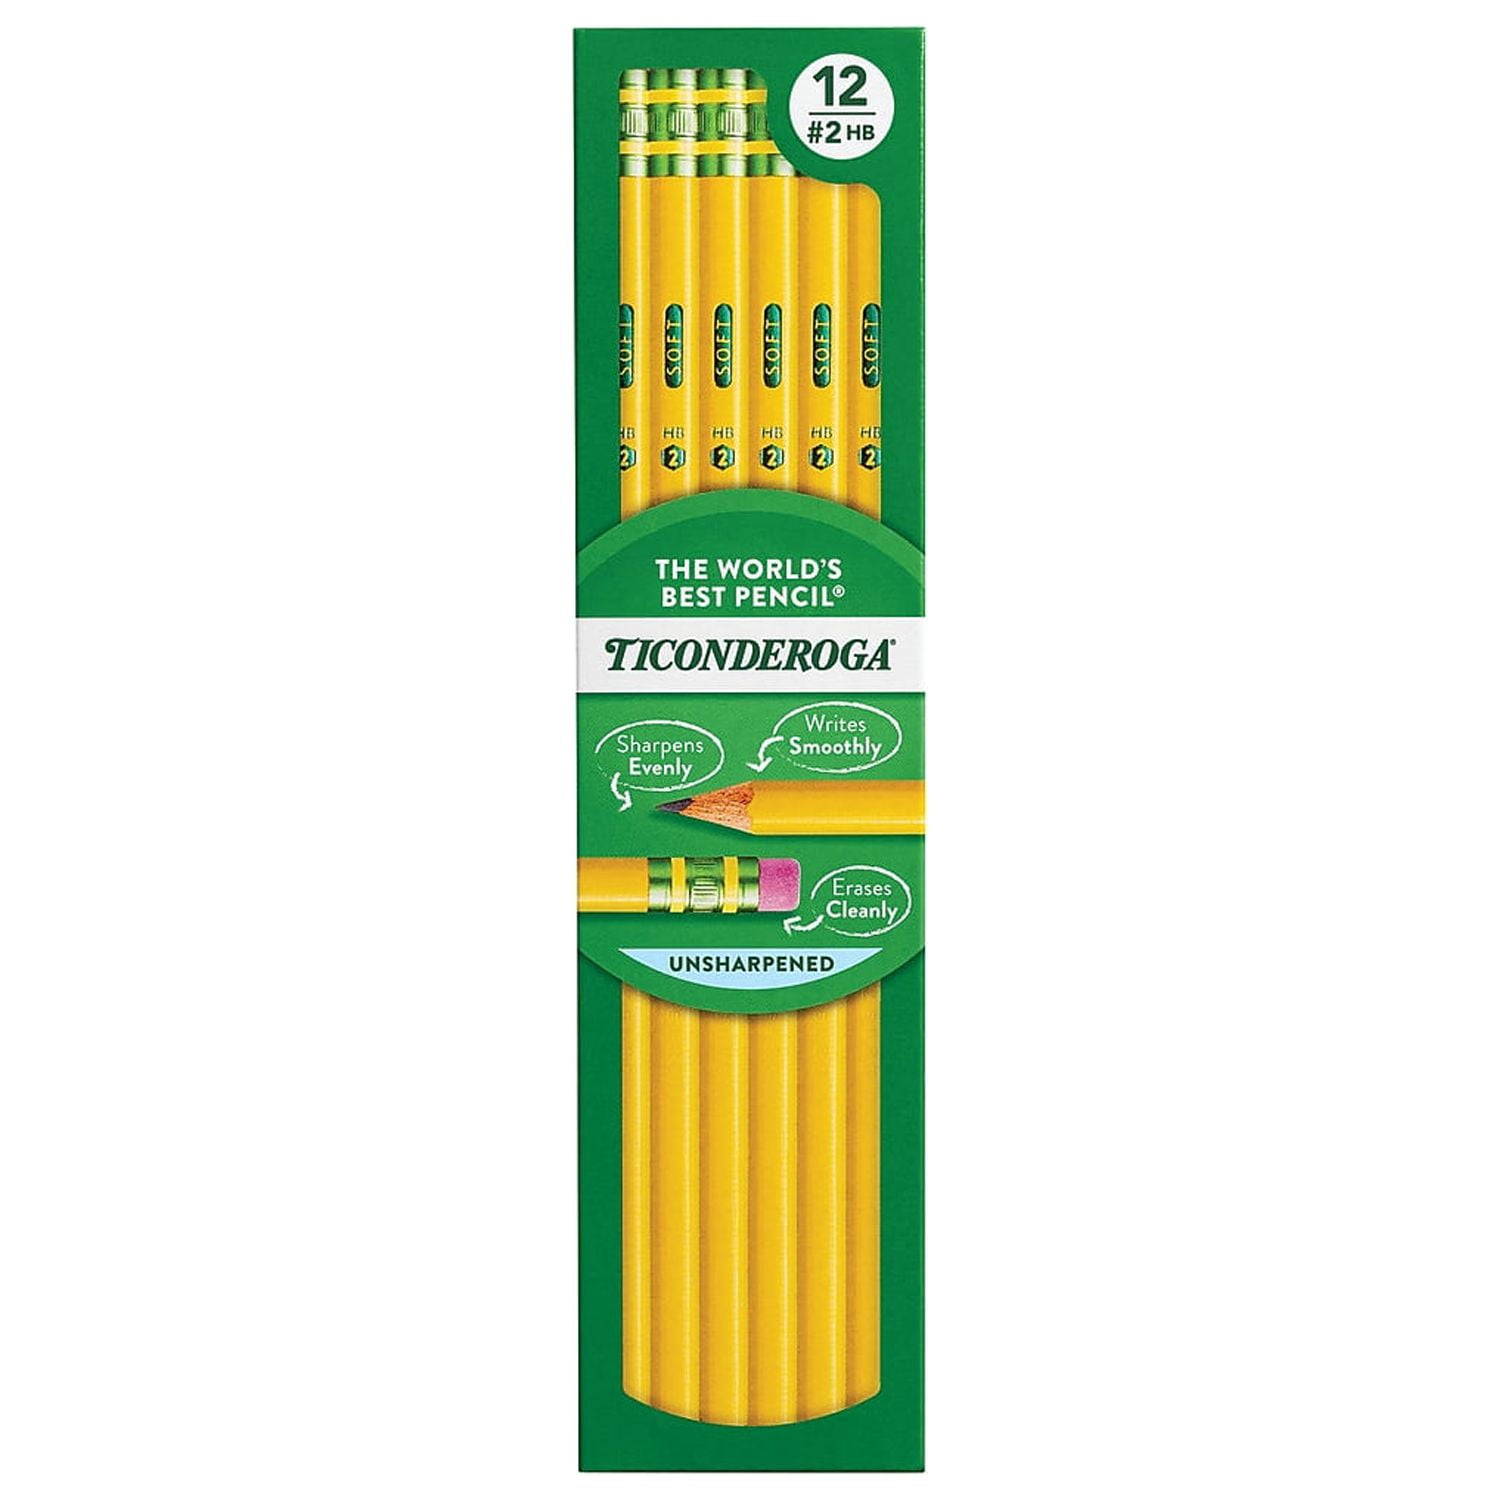 16 Best Pencils for Students 2018